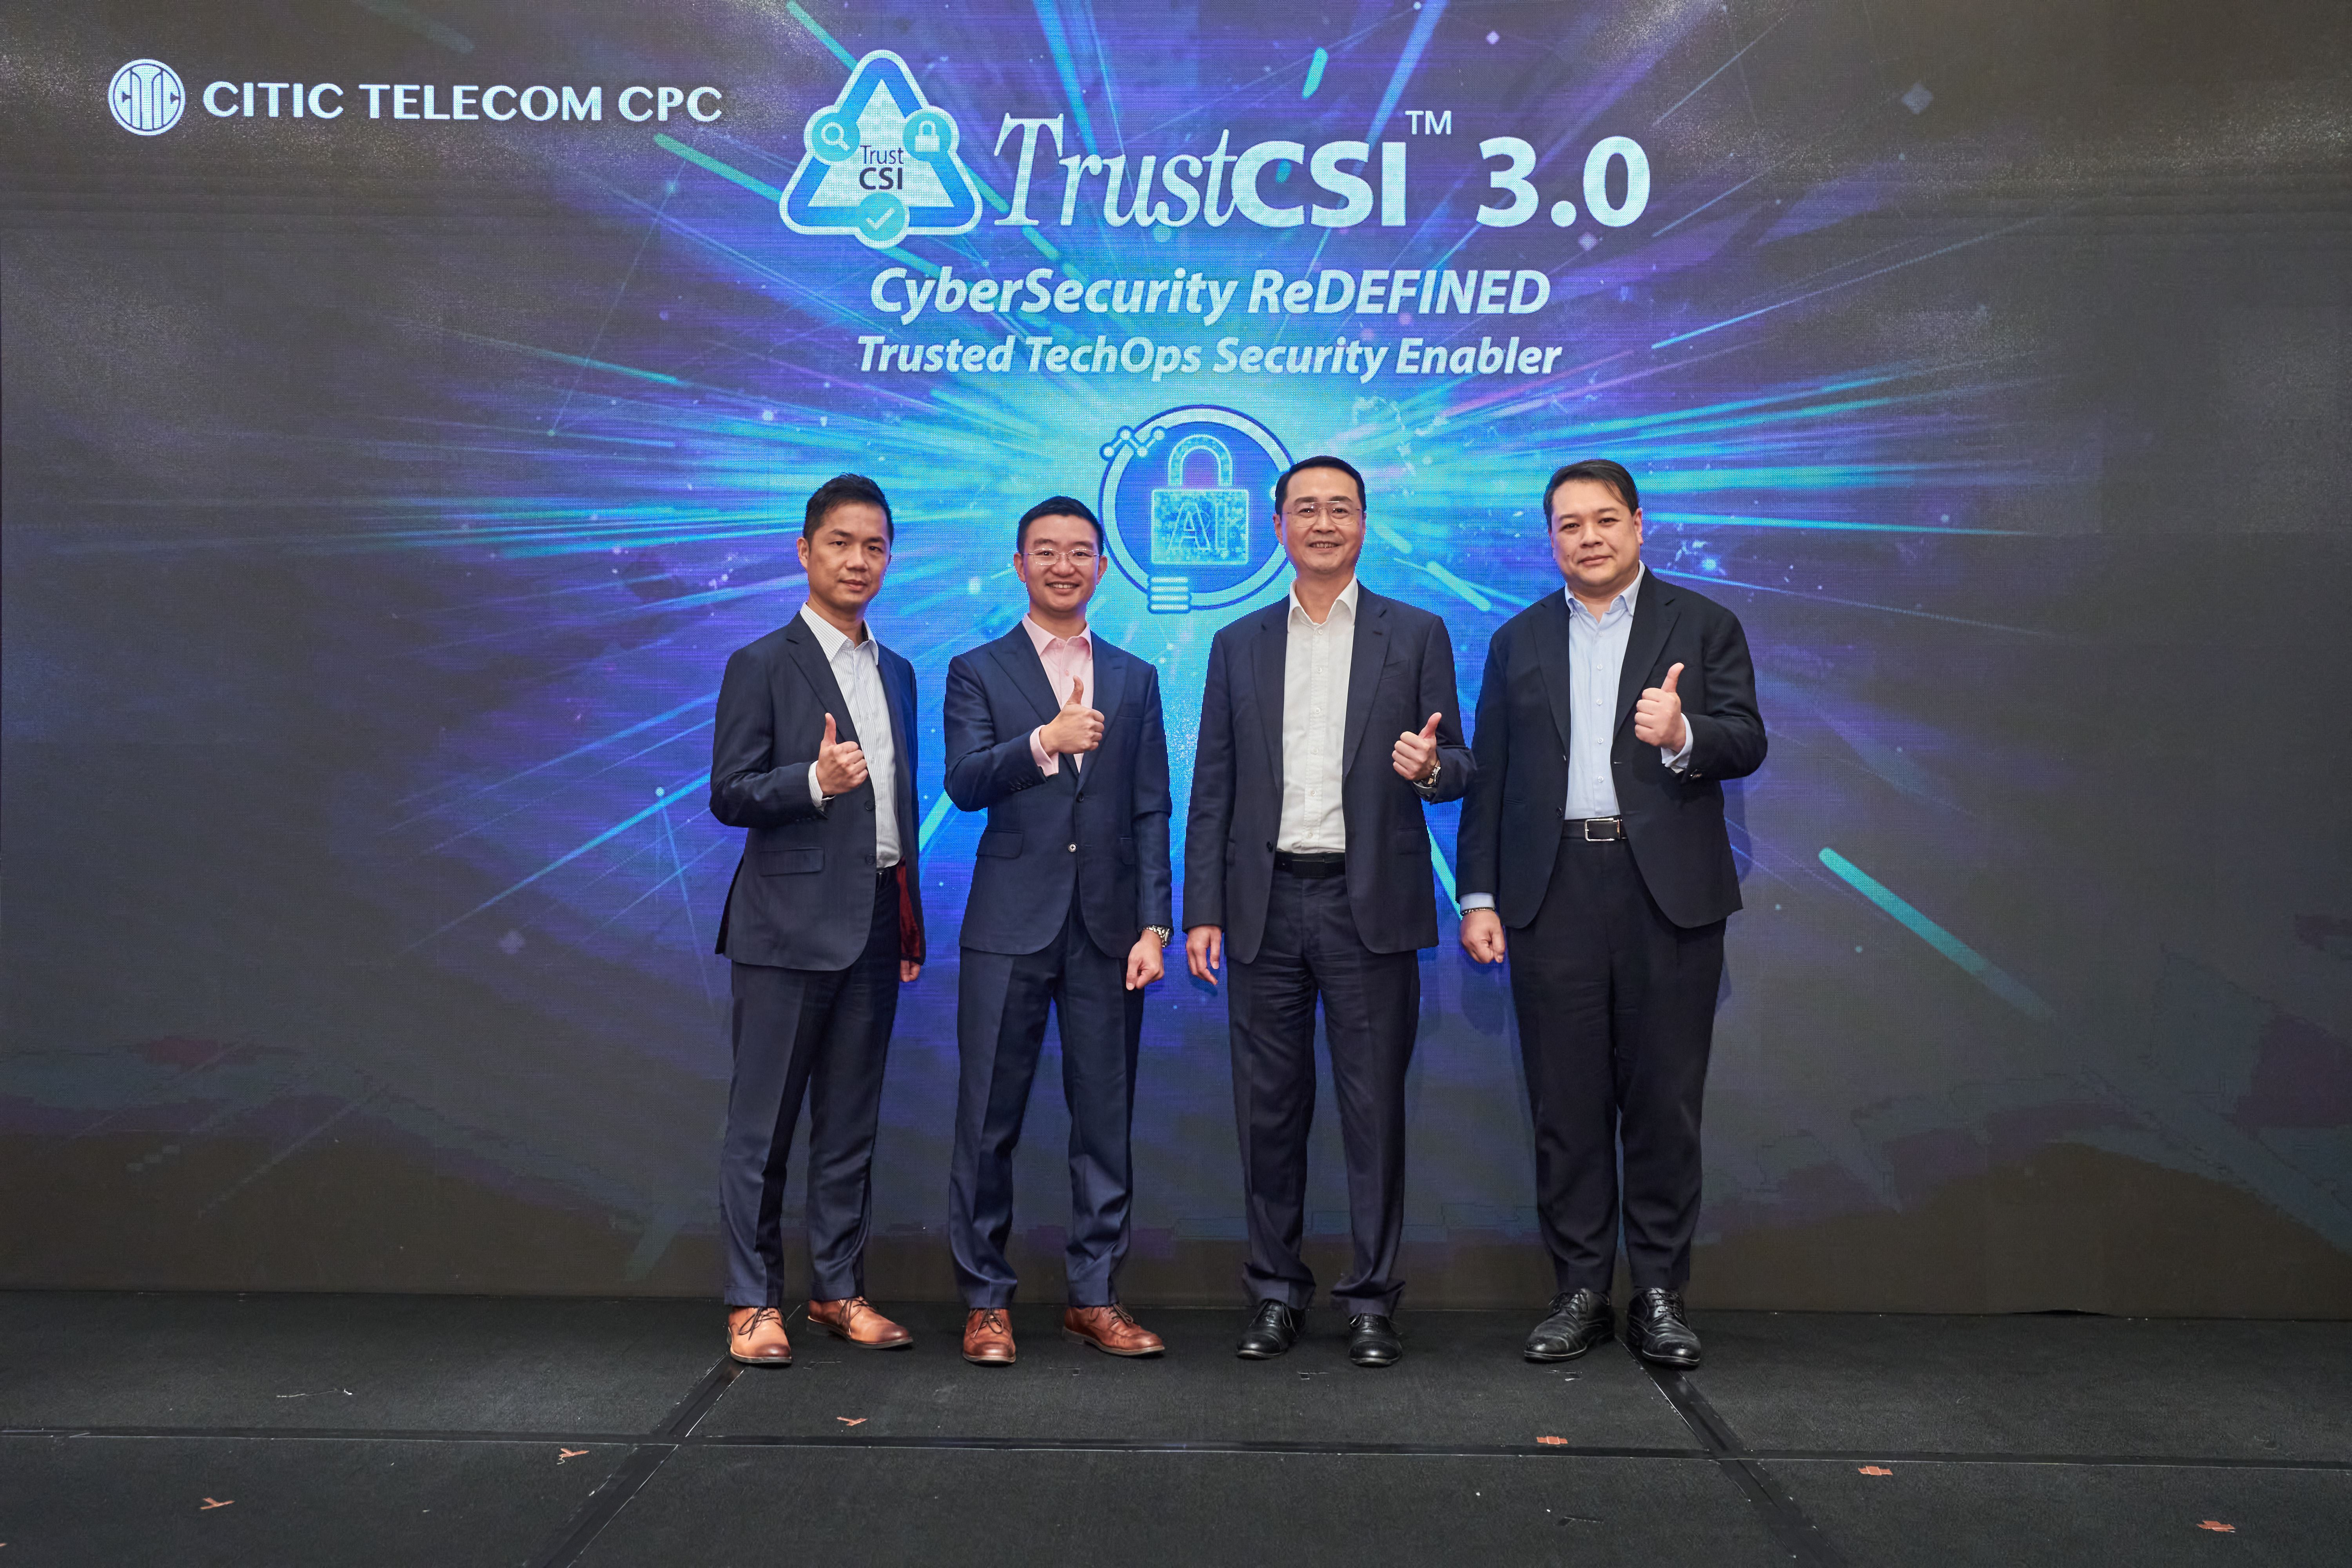 CITIC Telecom CPC Launches TrustCSI 3.0: Proactive Defense Enhances Security Operations Center Capabilities (Chinese Only)